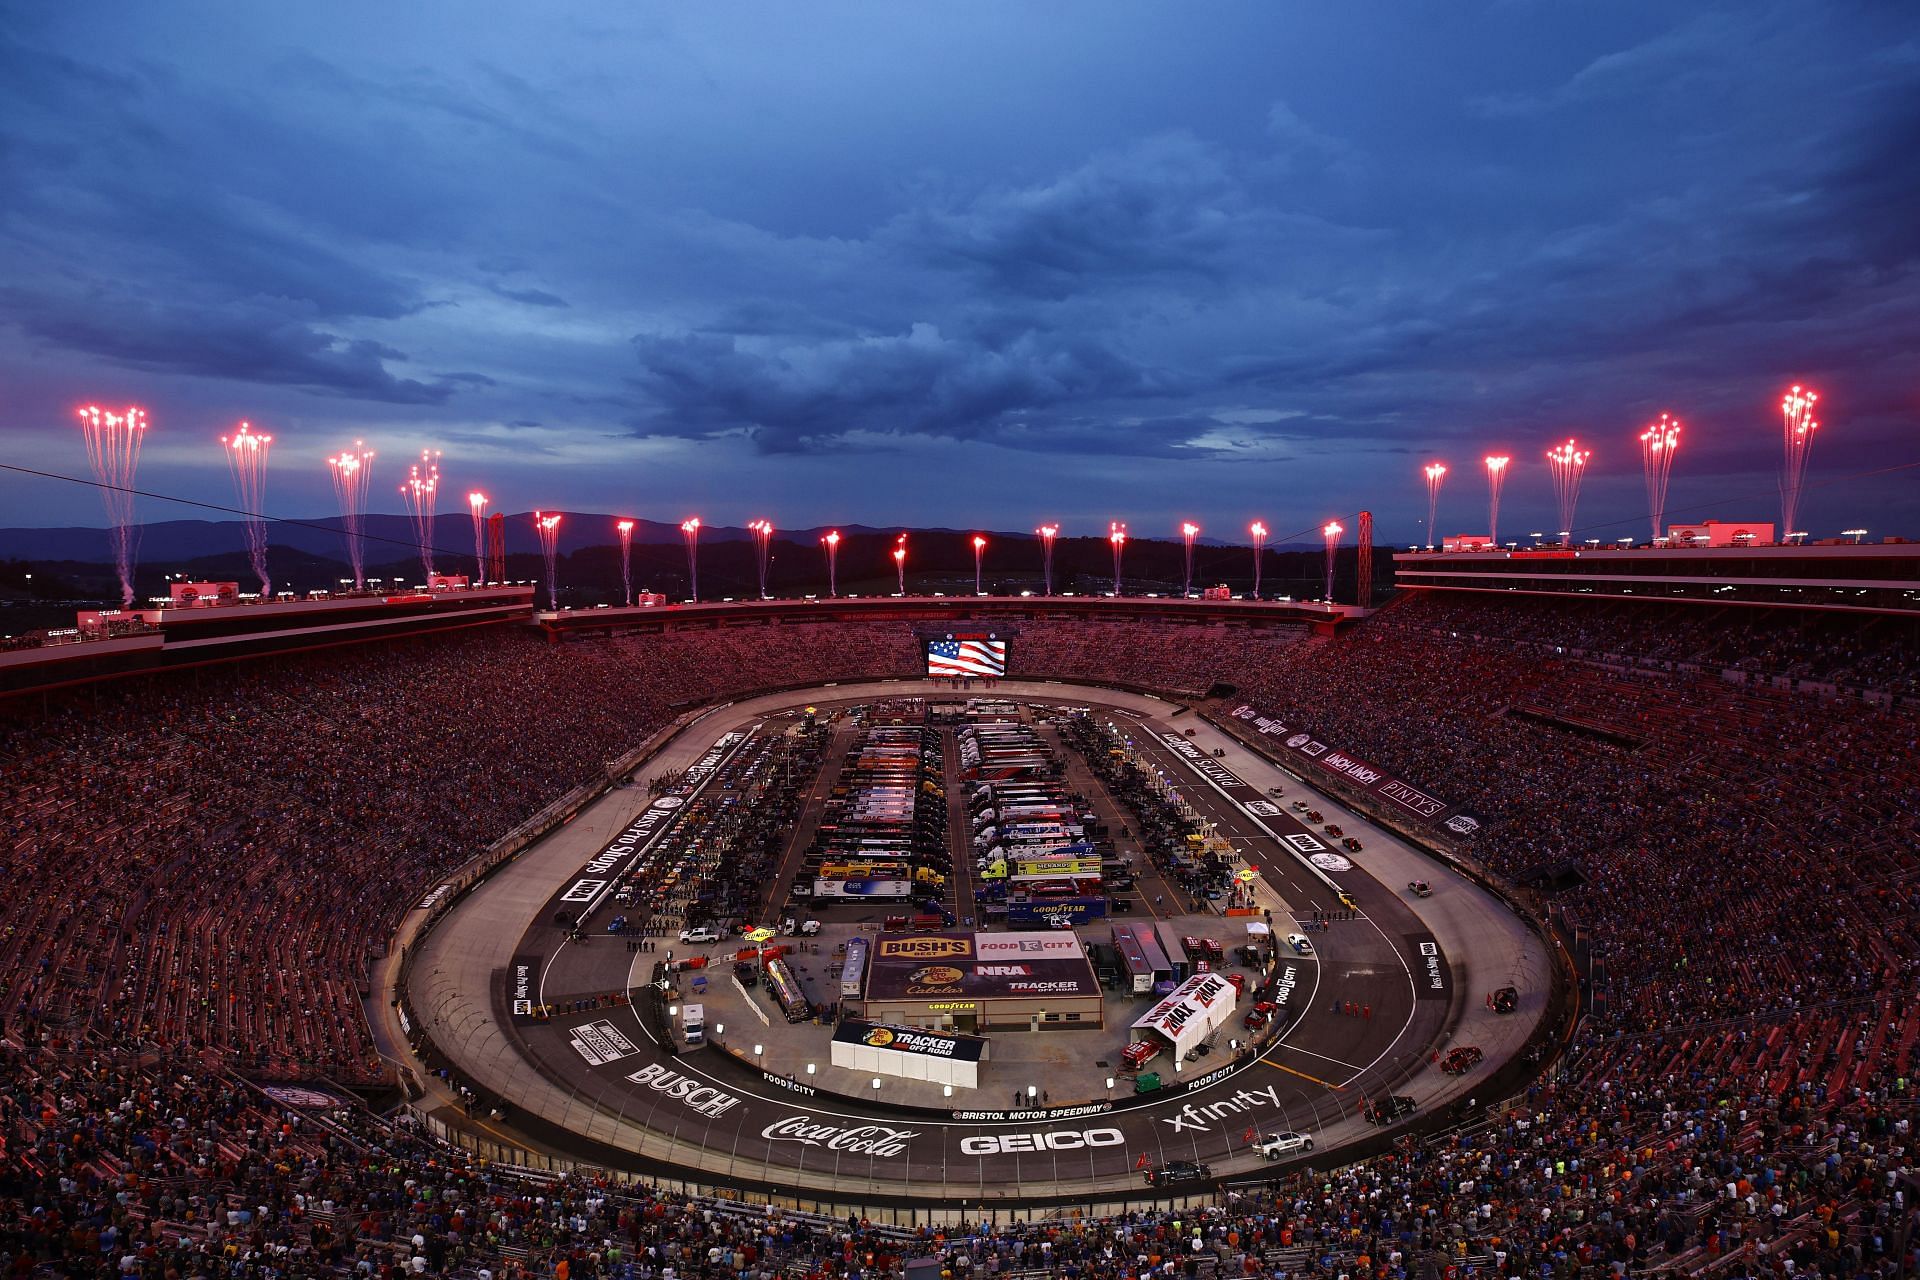 A general view of the Bristol Motor Speedway before the 2021 NASCAR Cup Series Bass Pro Shops Night Race in Tennessee (Photo by Jared C. Tilton/Getty Images)